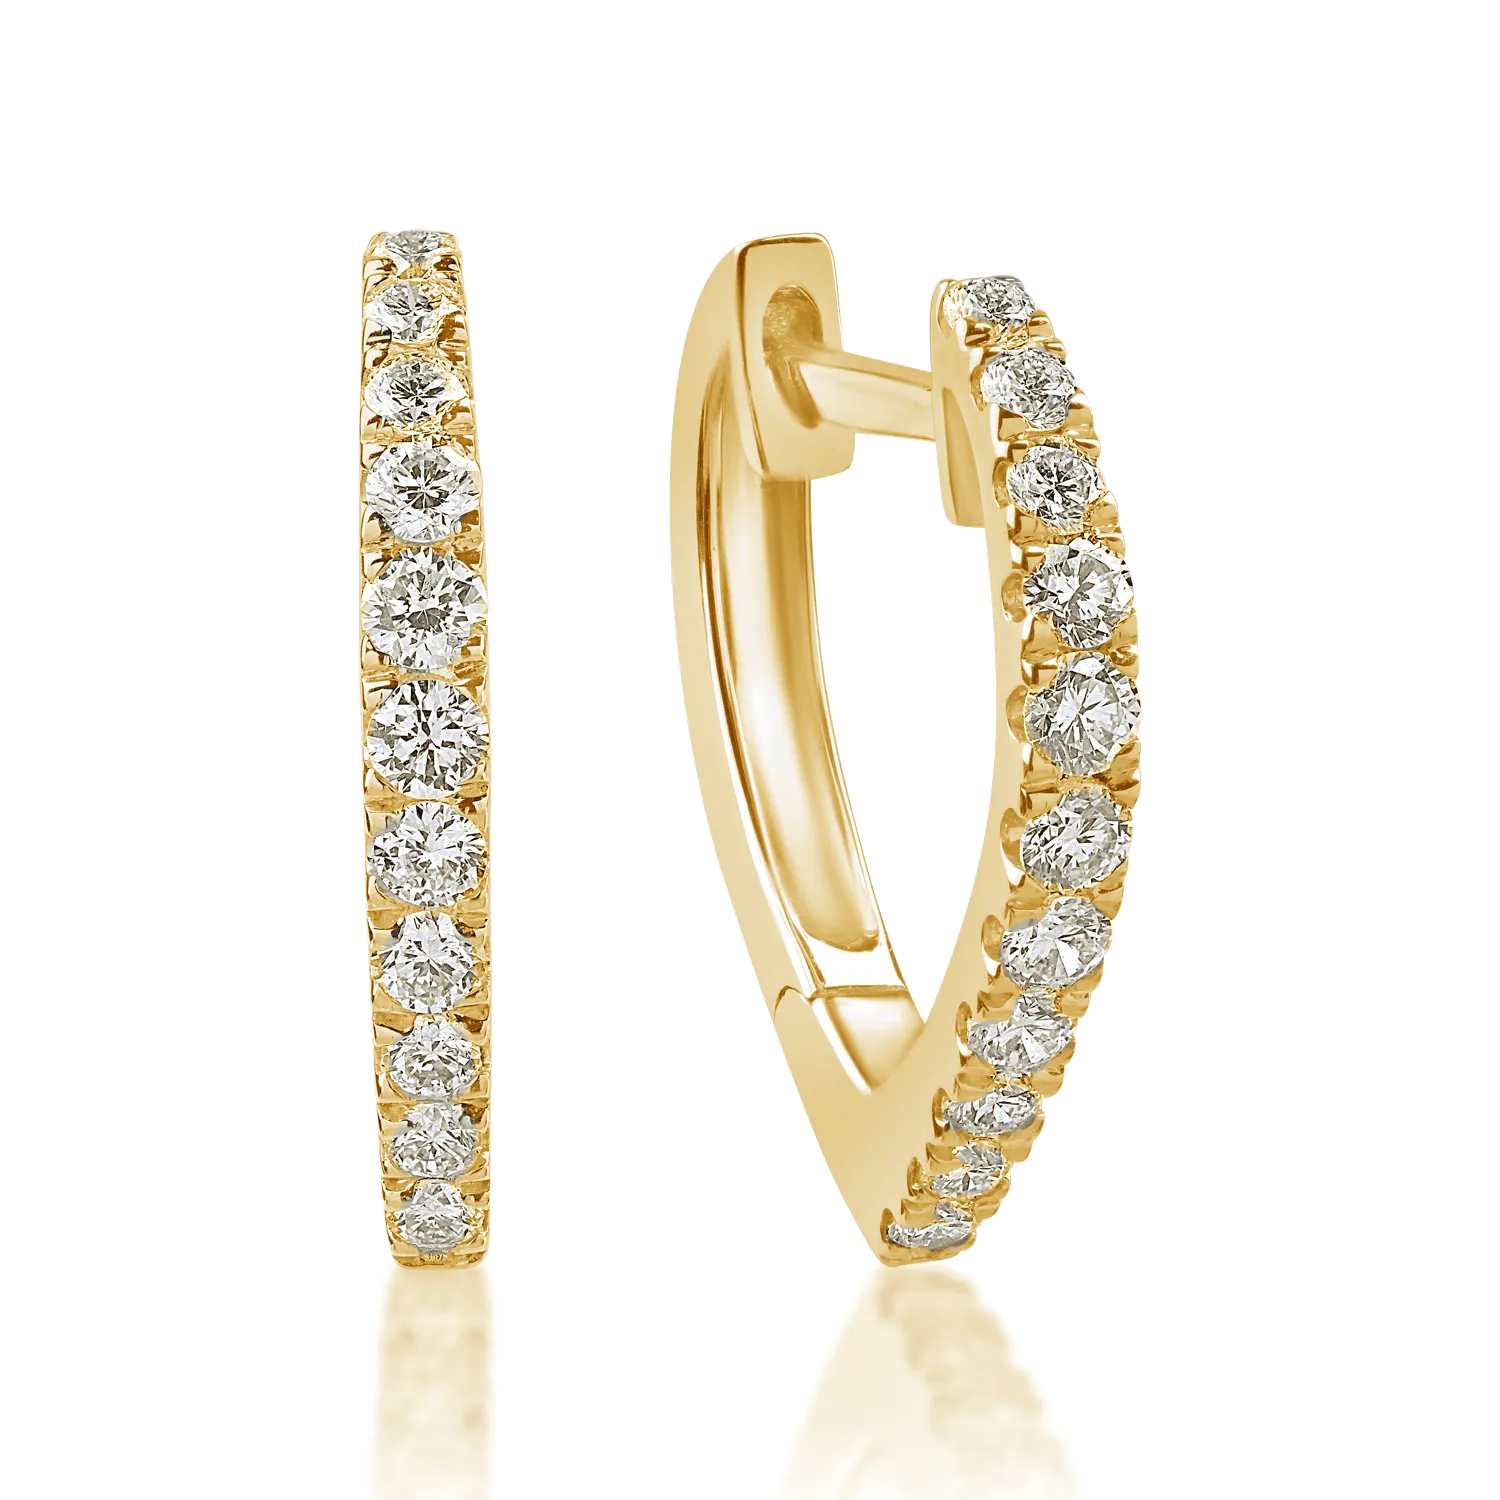 Yellow gold round earrings with 0.36ct diamonds